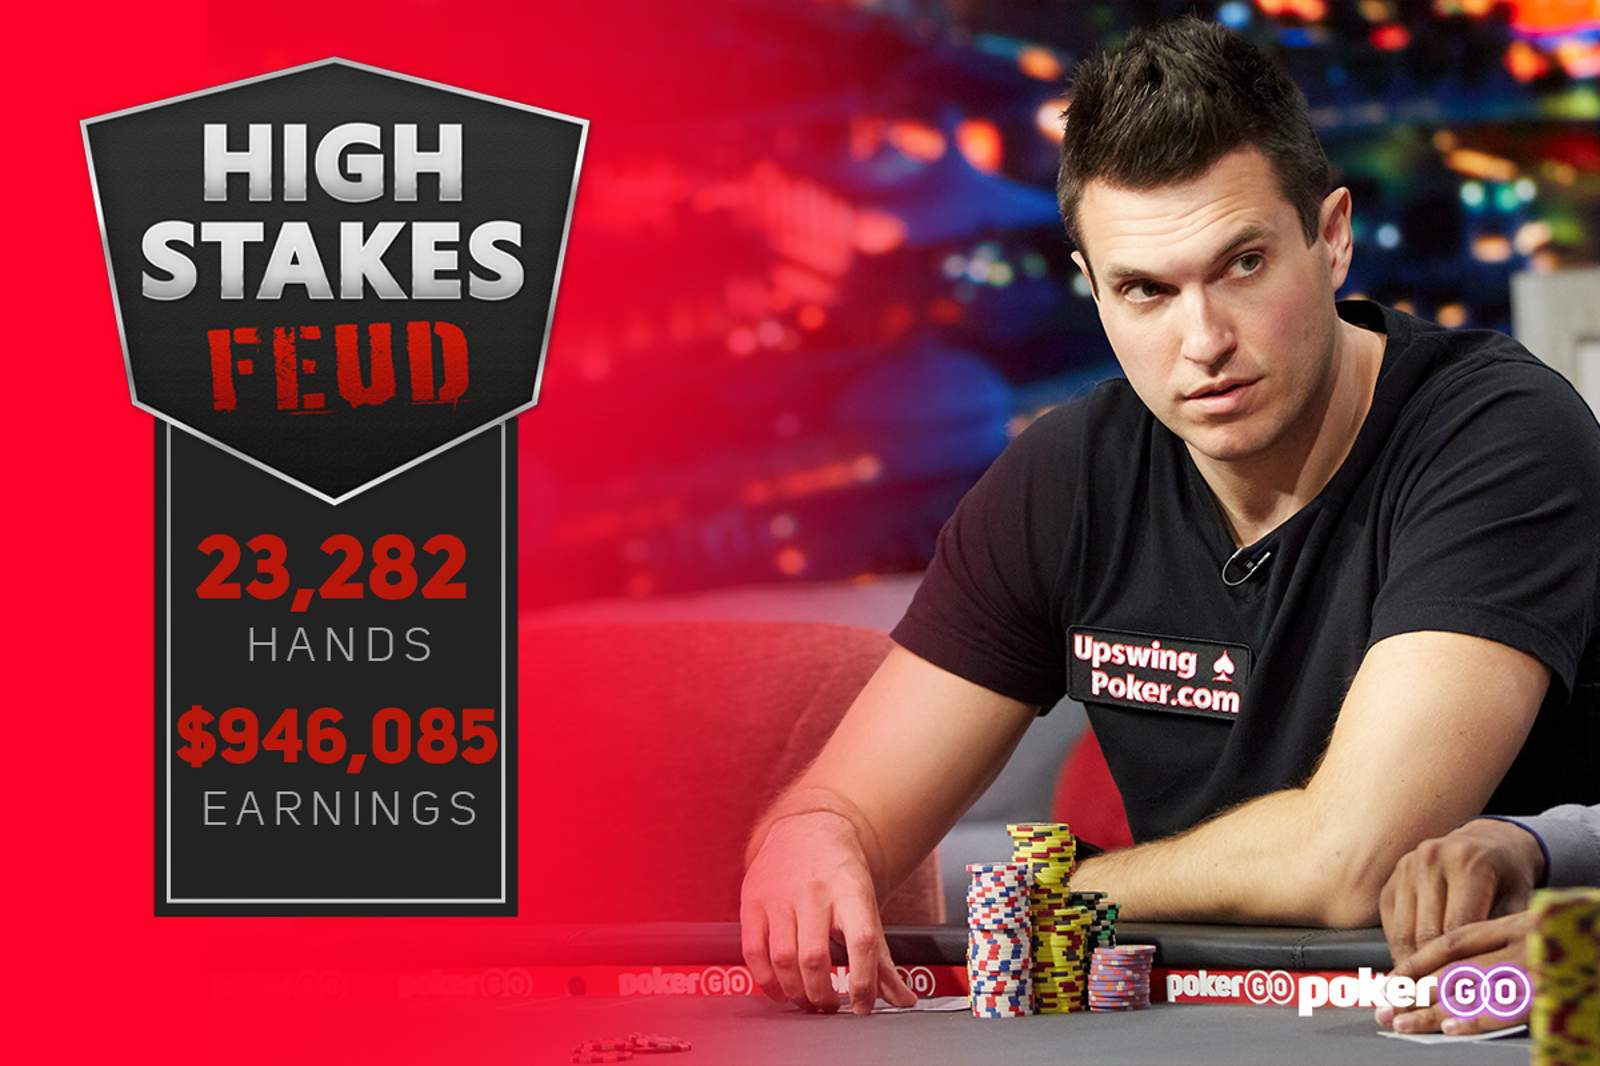 Doug Polk Leads Daniel Negreanu by $946,085.32 After 23,282 Hands in High Stakes Feud